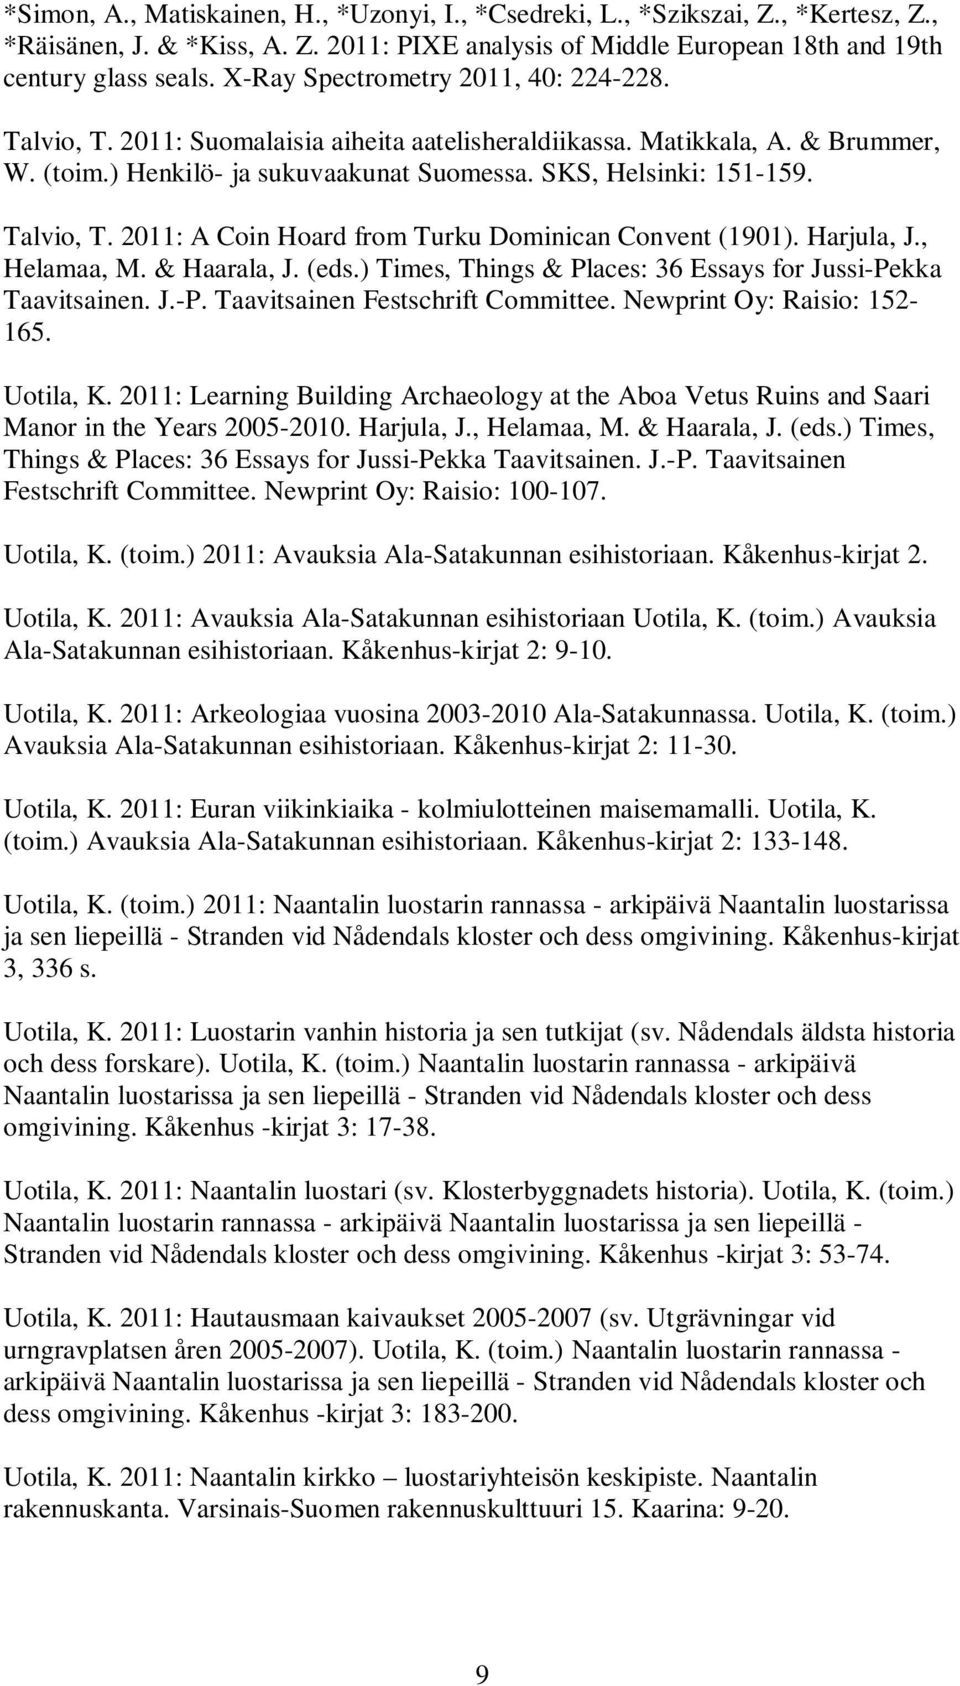 Talvio, T. 2011: A Coin Hoard from Turku Dominican Convent (1901). Harjula, J., Helamaa, M. & Haarala, J. (eds.) Times, Things & Places: 36 Essays for Jussi-Pekka Taavitsainen. J.-P. Taavitsainen Festschrift Committee.